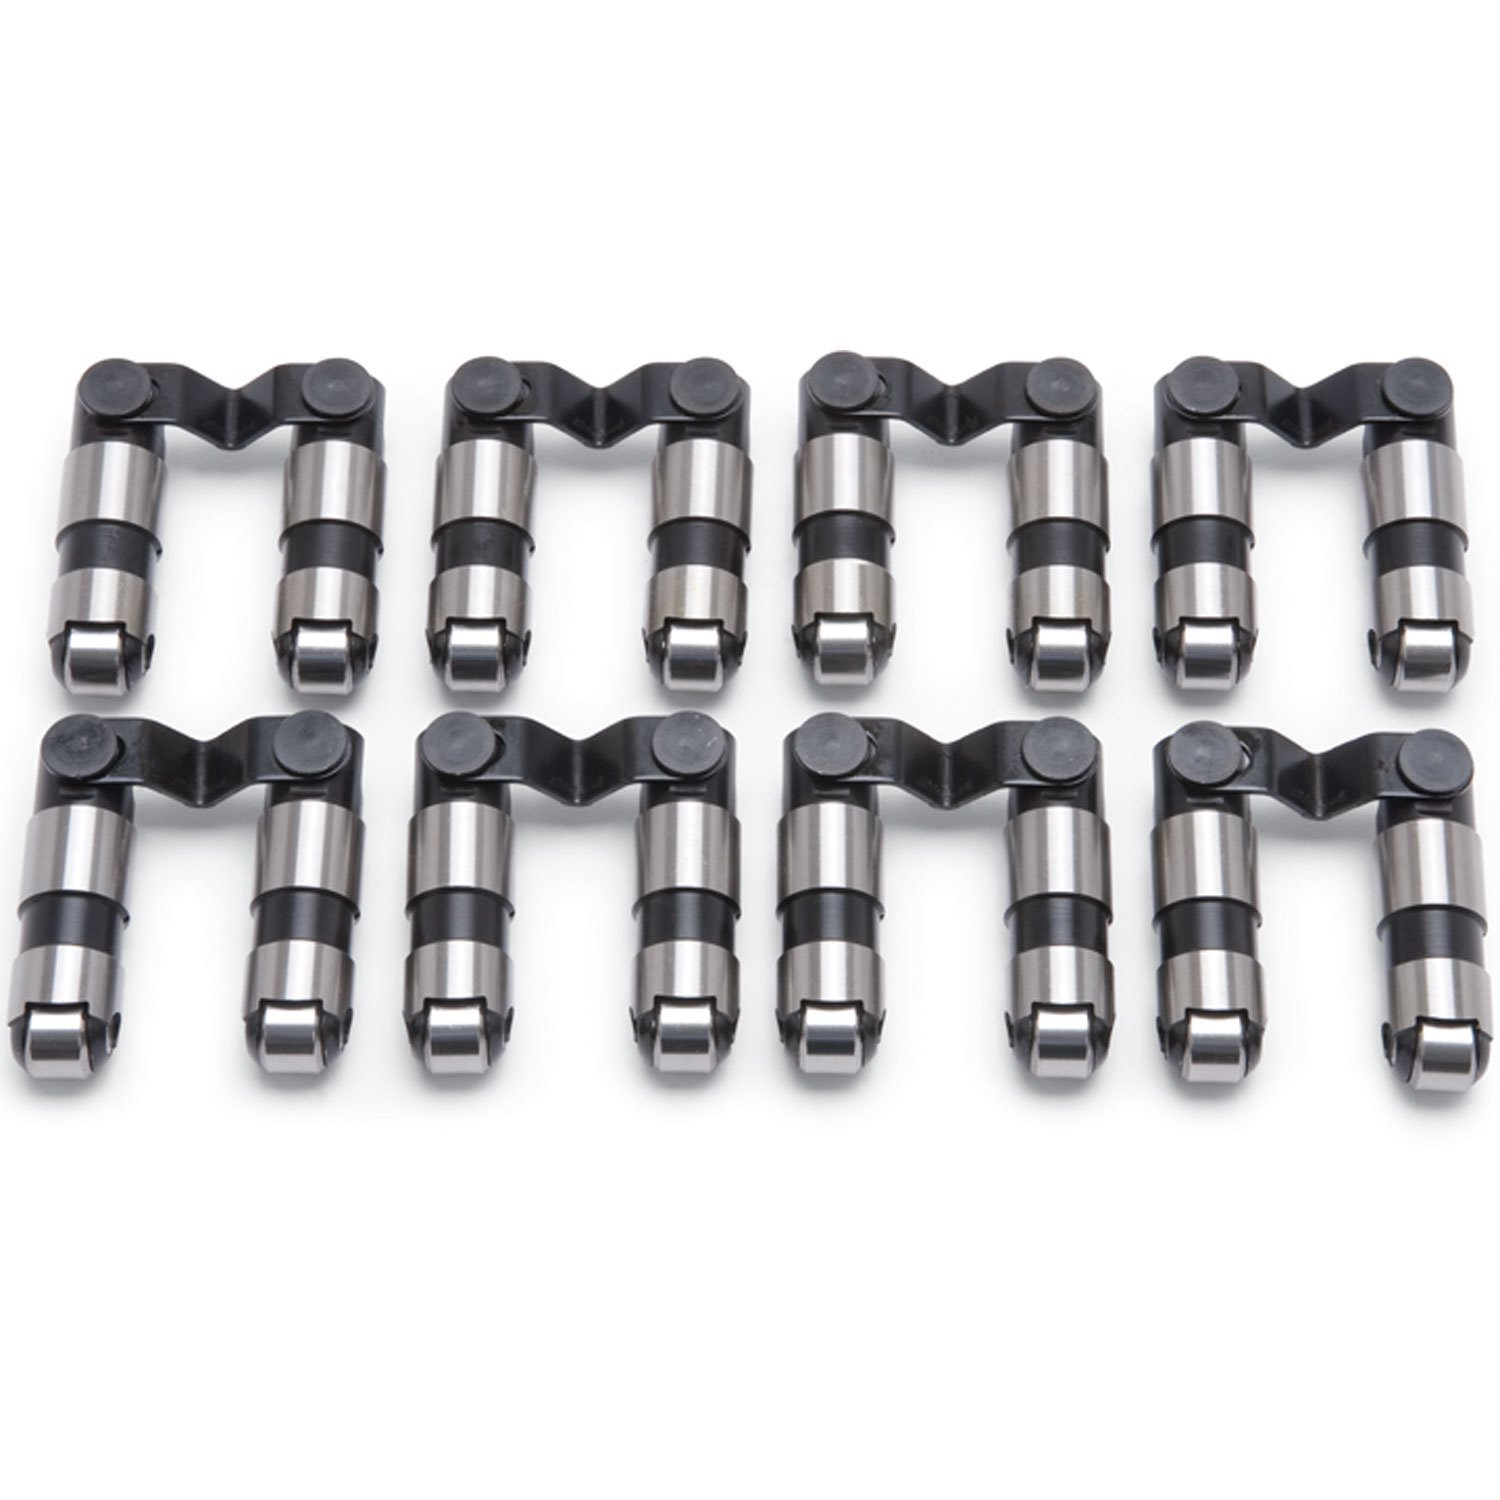 Retro-fit Hydraulic Roller Lifters for Small Block Chrysler